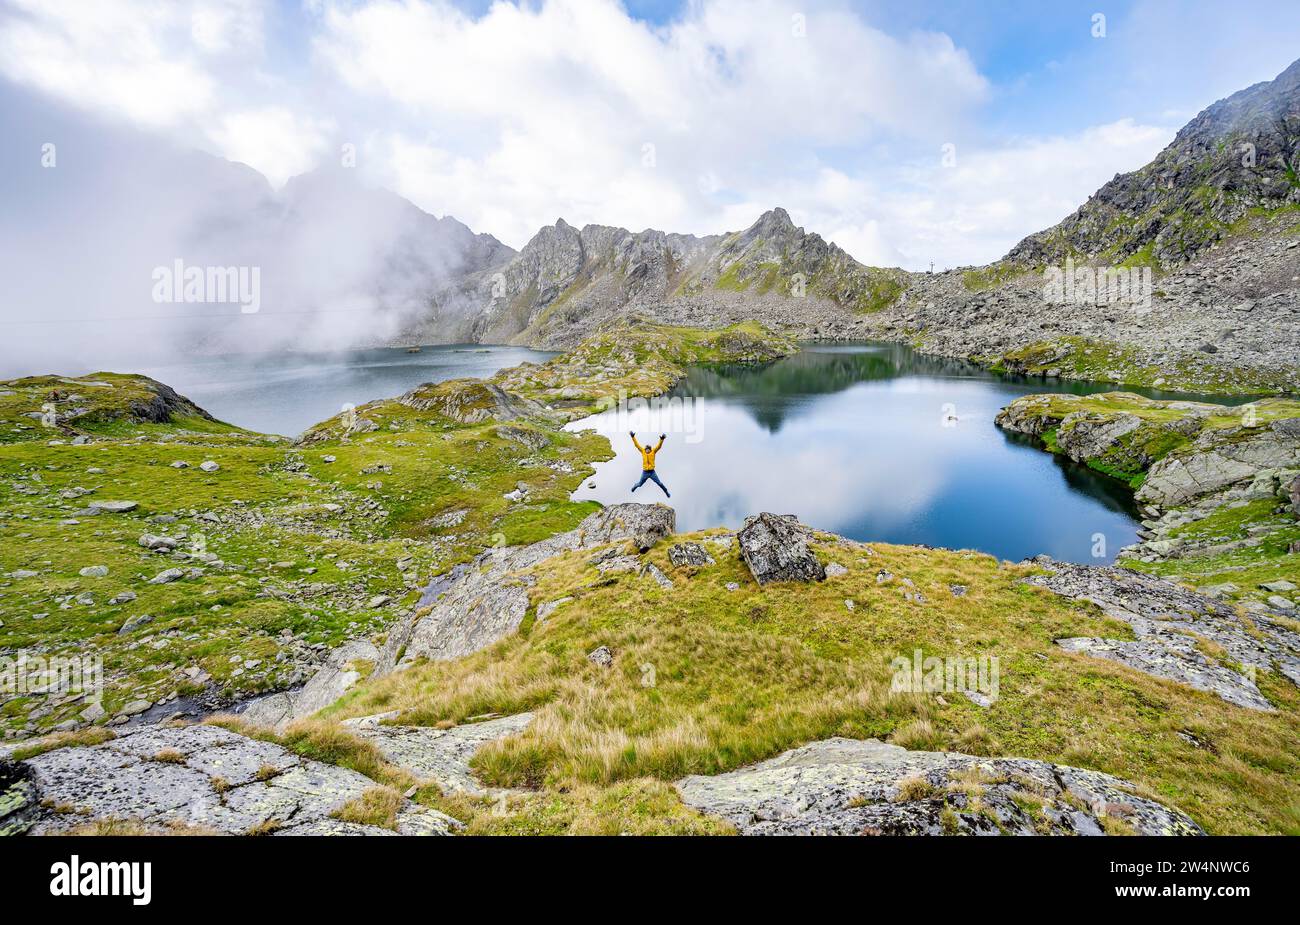 Mountaineer jumping into the air, mountain landscape with lake plateau, Kreuzsee and Wangenitzsee, Wiener Hoehenweg, Schober group, Hohe Tauern Stock Photo